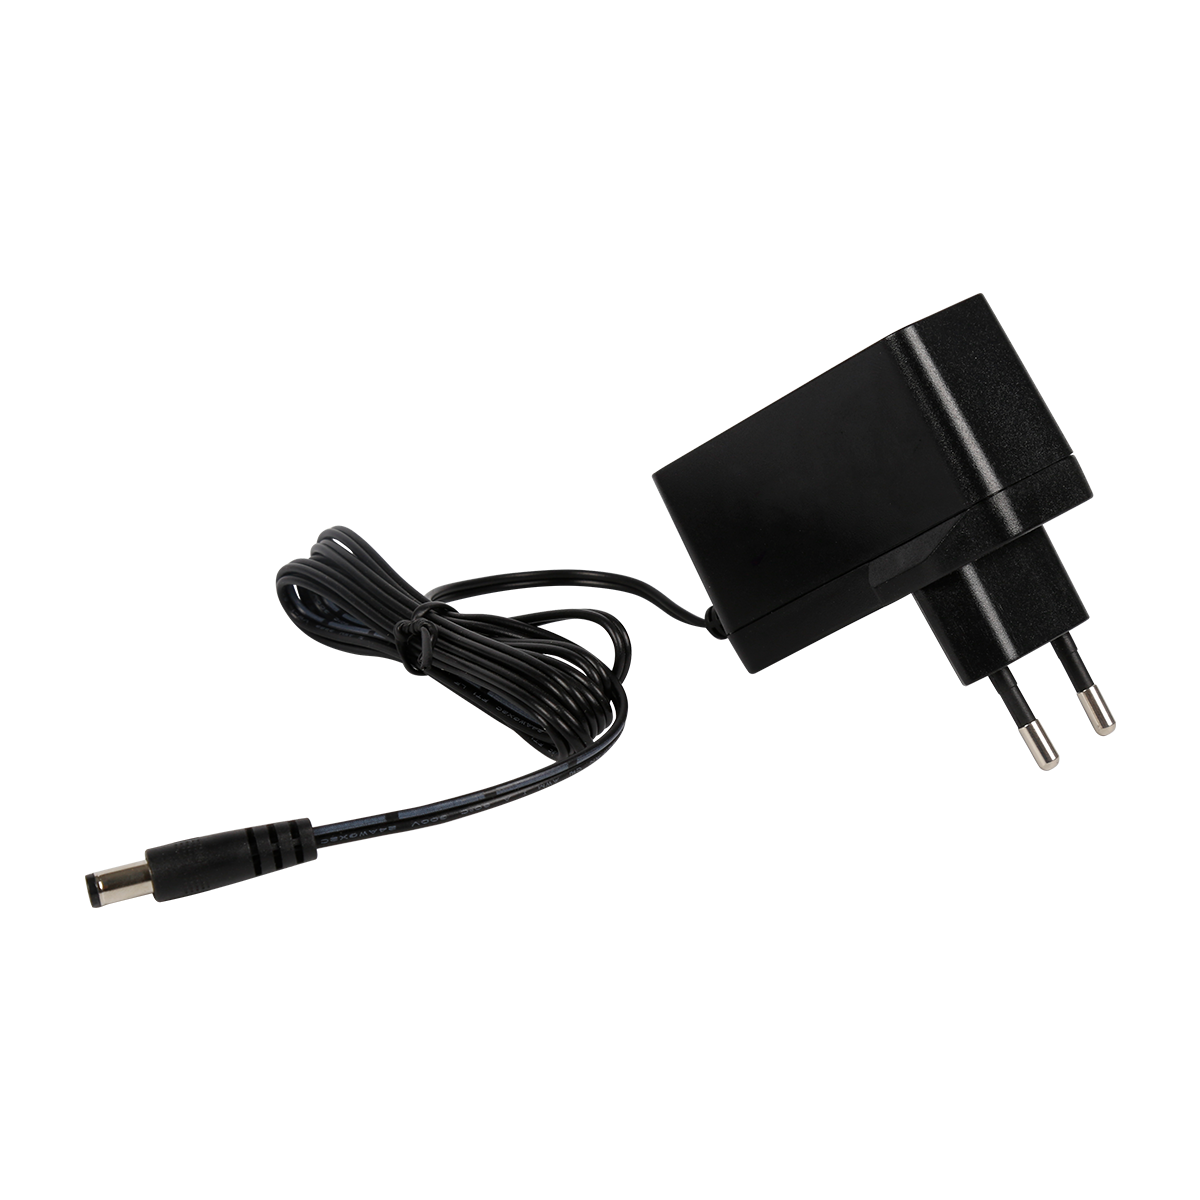 High-quality power adapter to ensure the safety of peoples electricity(图1)